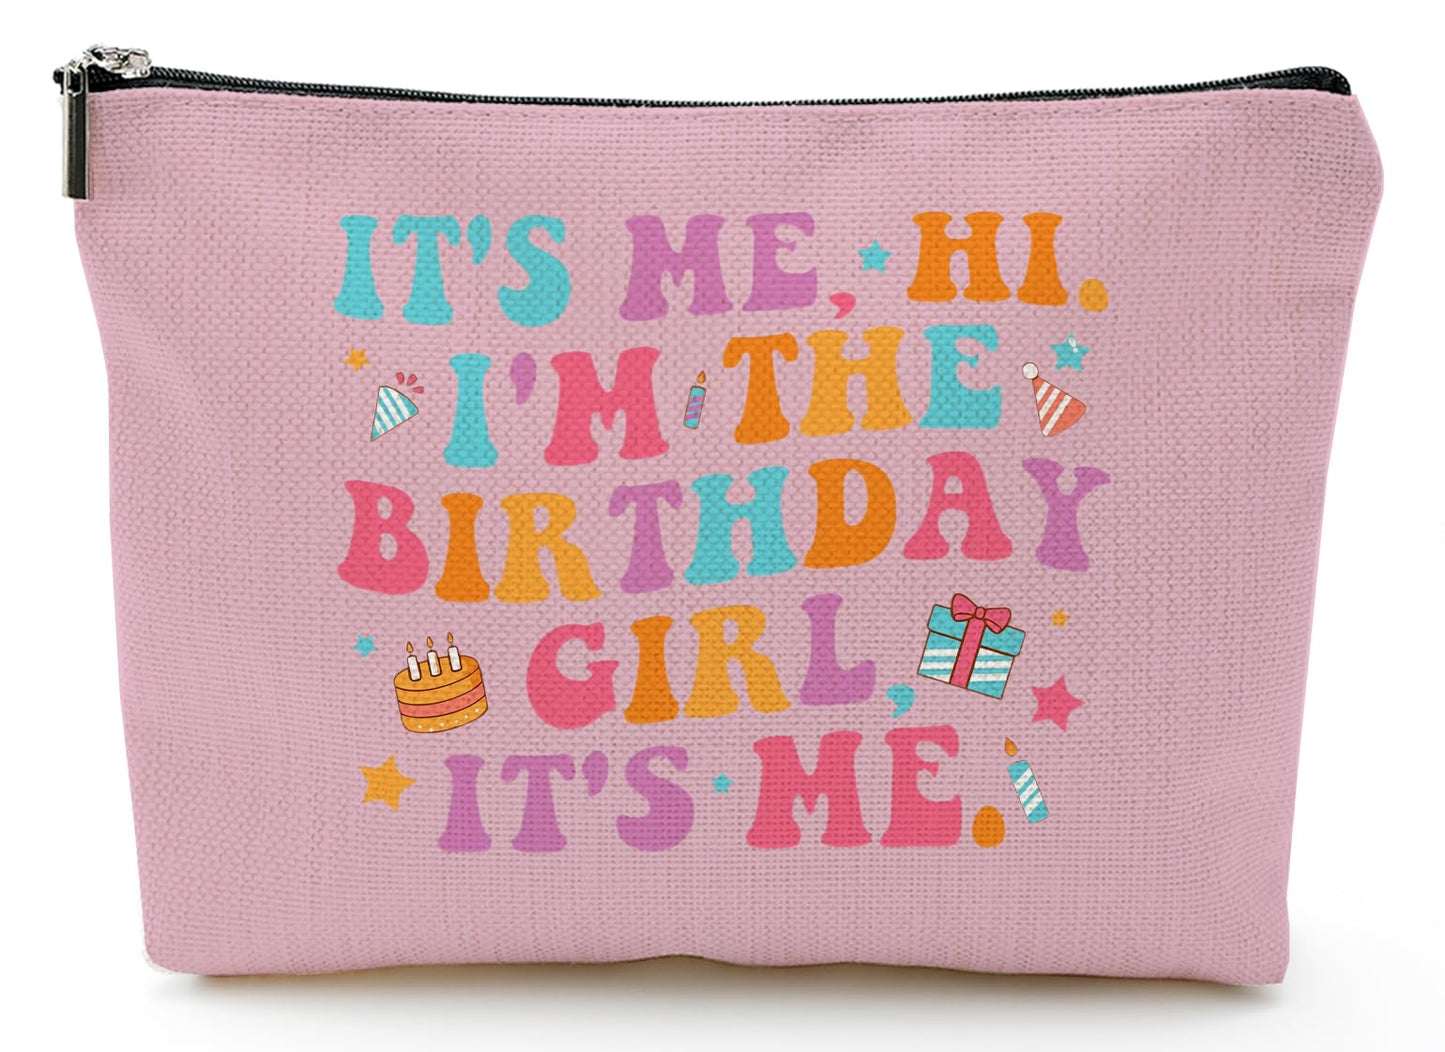 Its Me Hi I'm the Birthday Girl Makeup Bag for Singer Fans,Music Lovers Merch Birthday gifts for TS Fans,Pink Cosmtic Bag for Fans